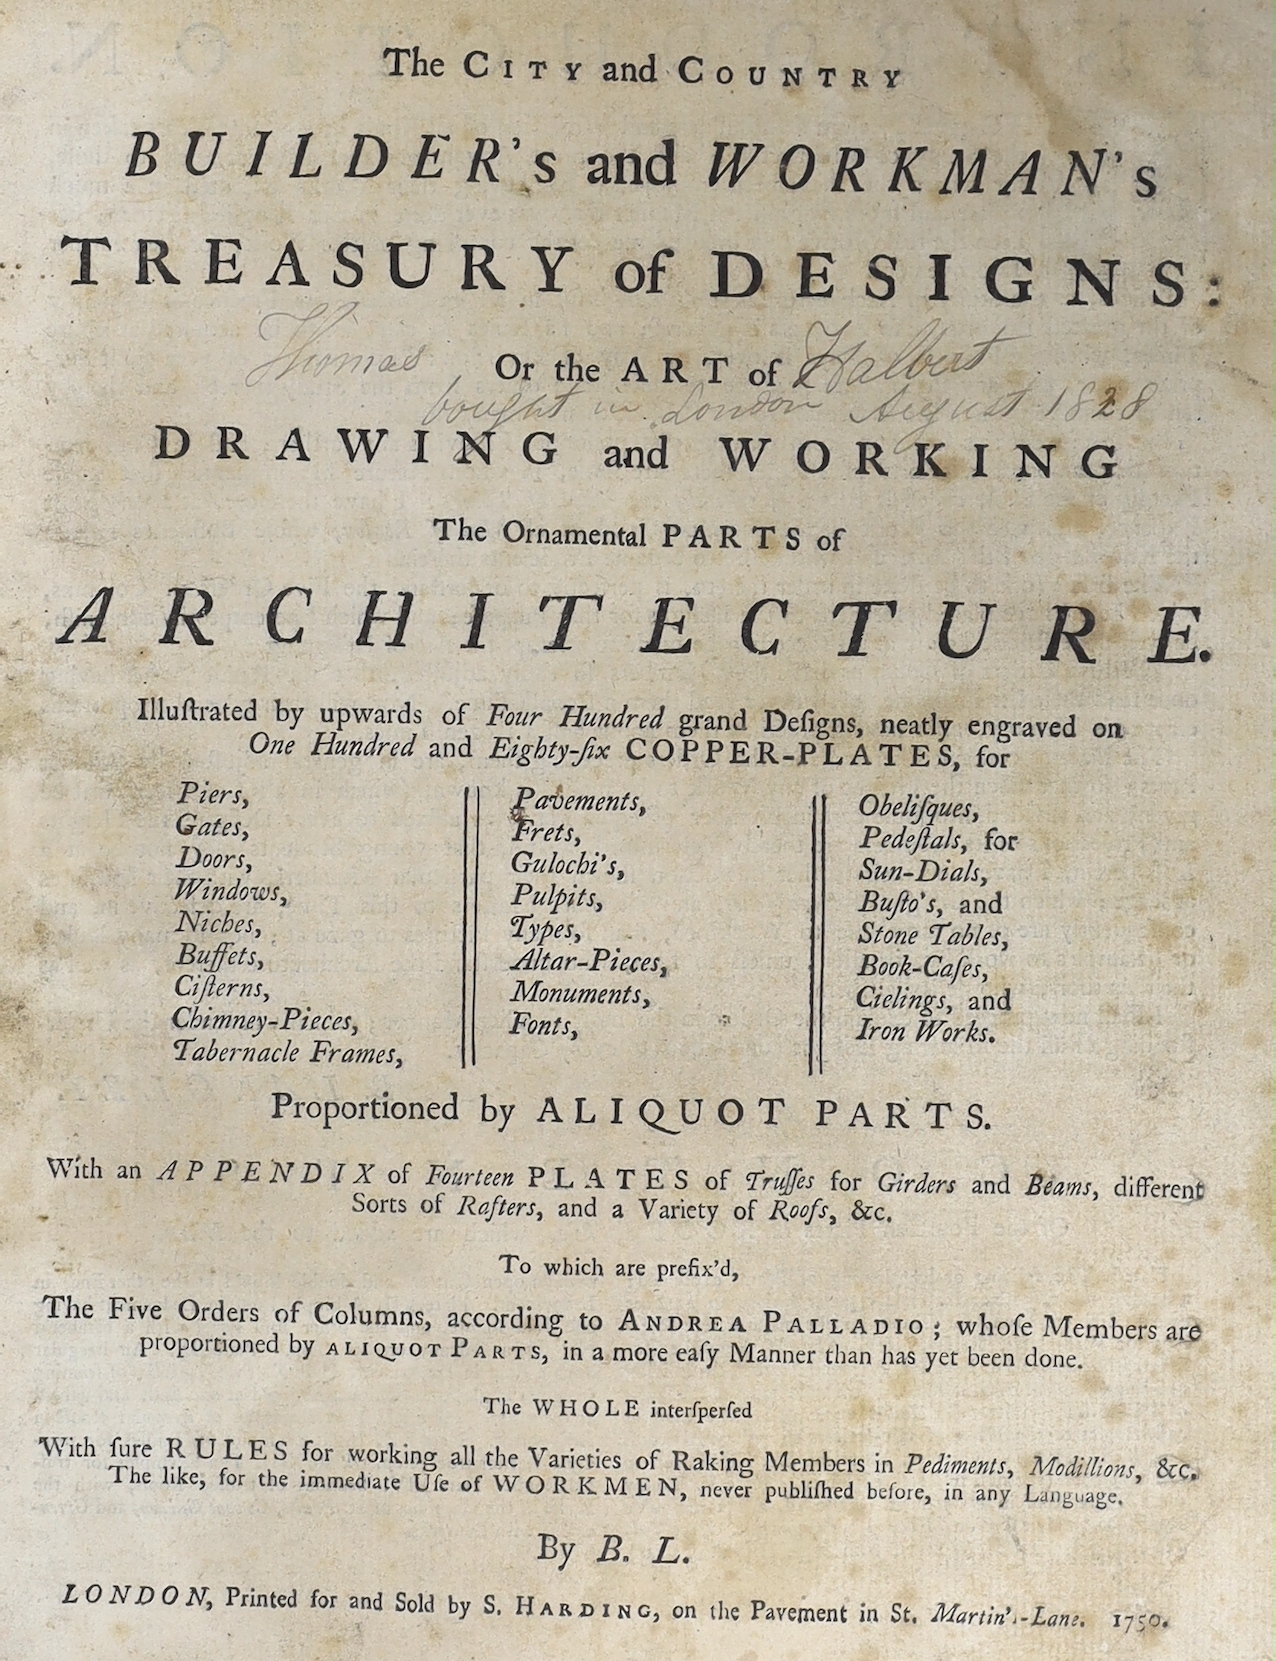 Langley, Batty – The City and Country Builder’s and Workman’s Treasury of Designs, 4to, rebound in modern half calf, 197 (of 199) plates, S. Harding, London, 1750